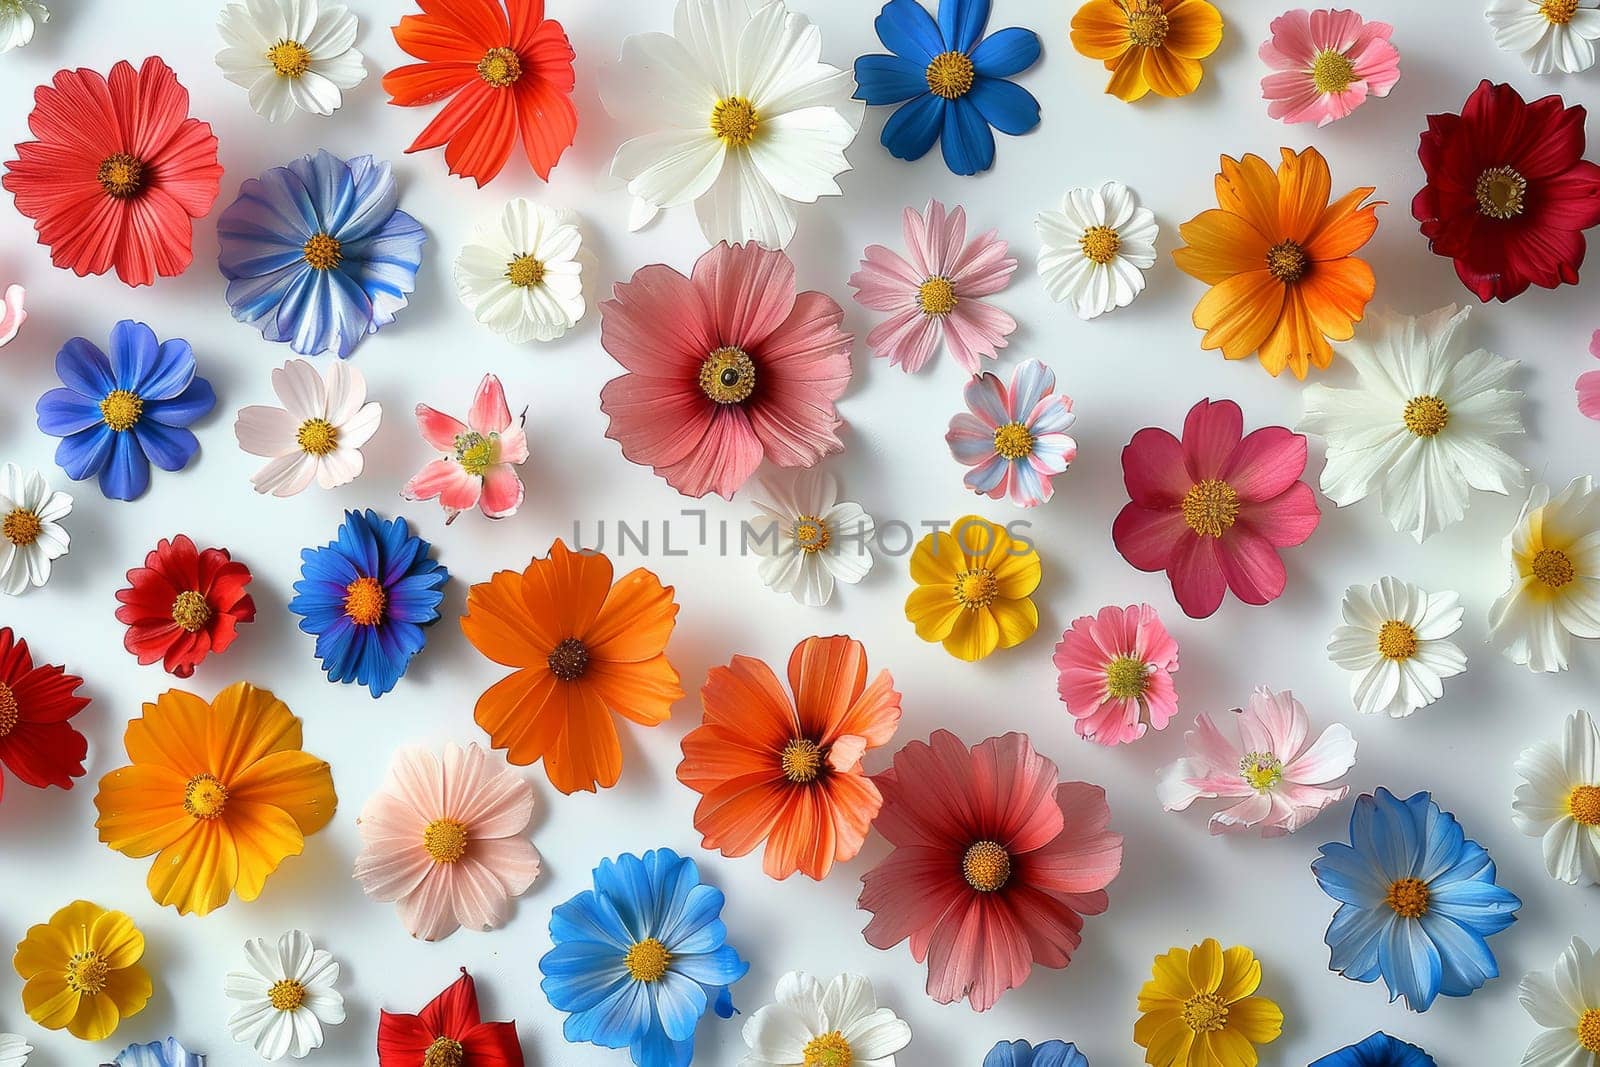 A colorful bouquet of flowers with a variety of colors including red, yellow by itchaznong